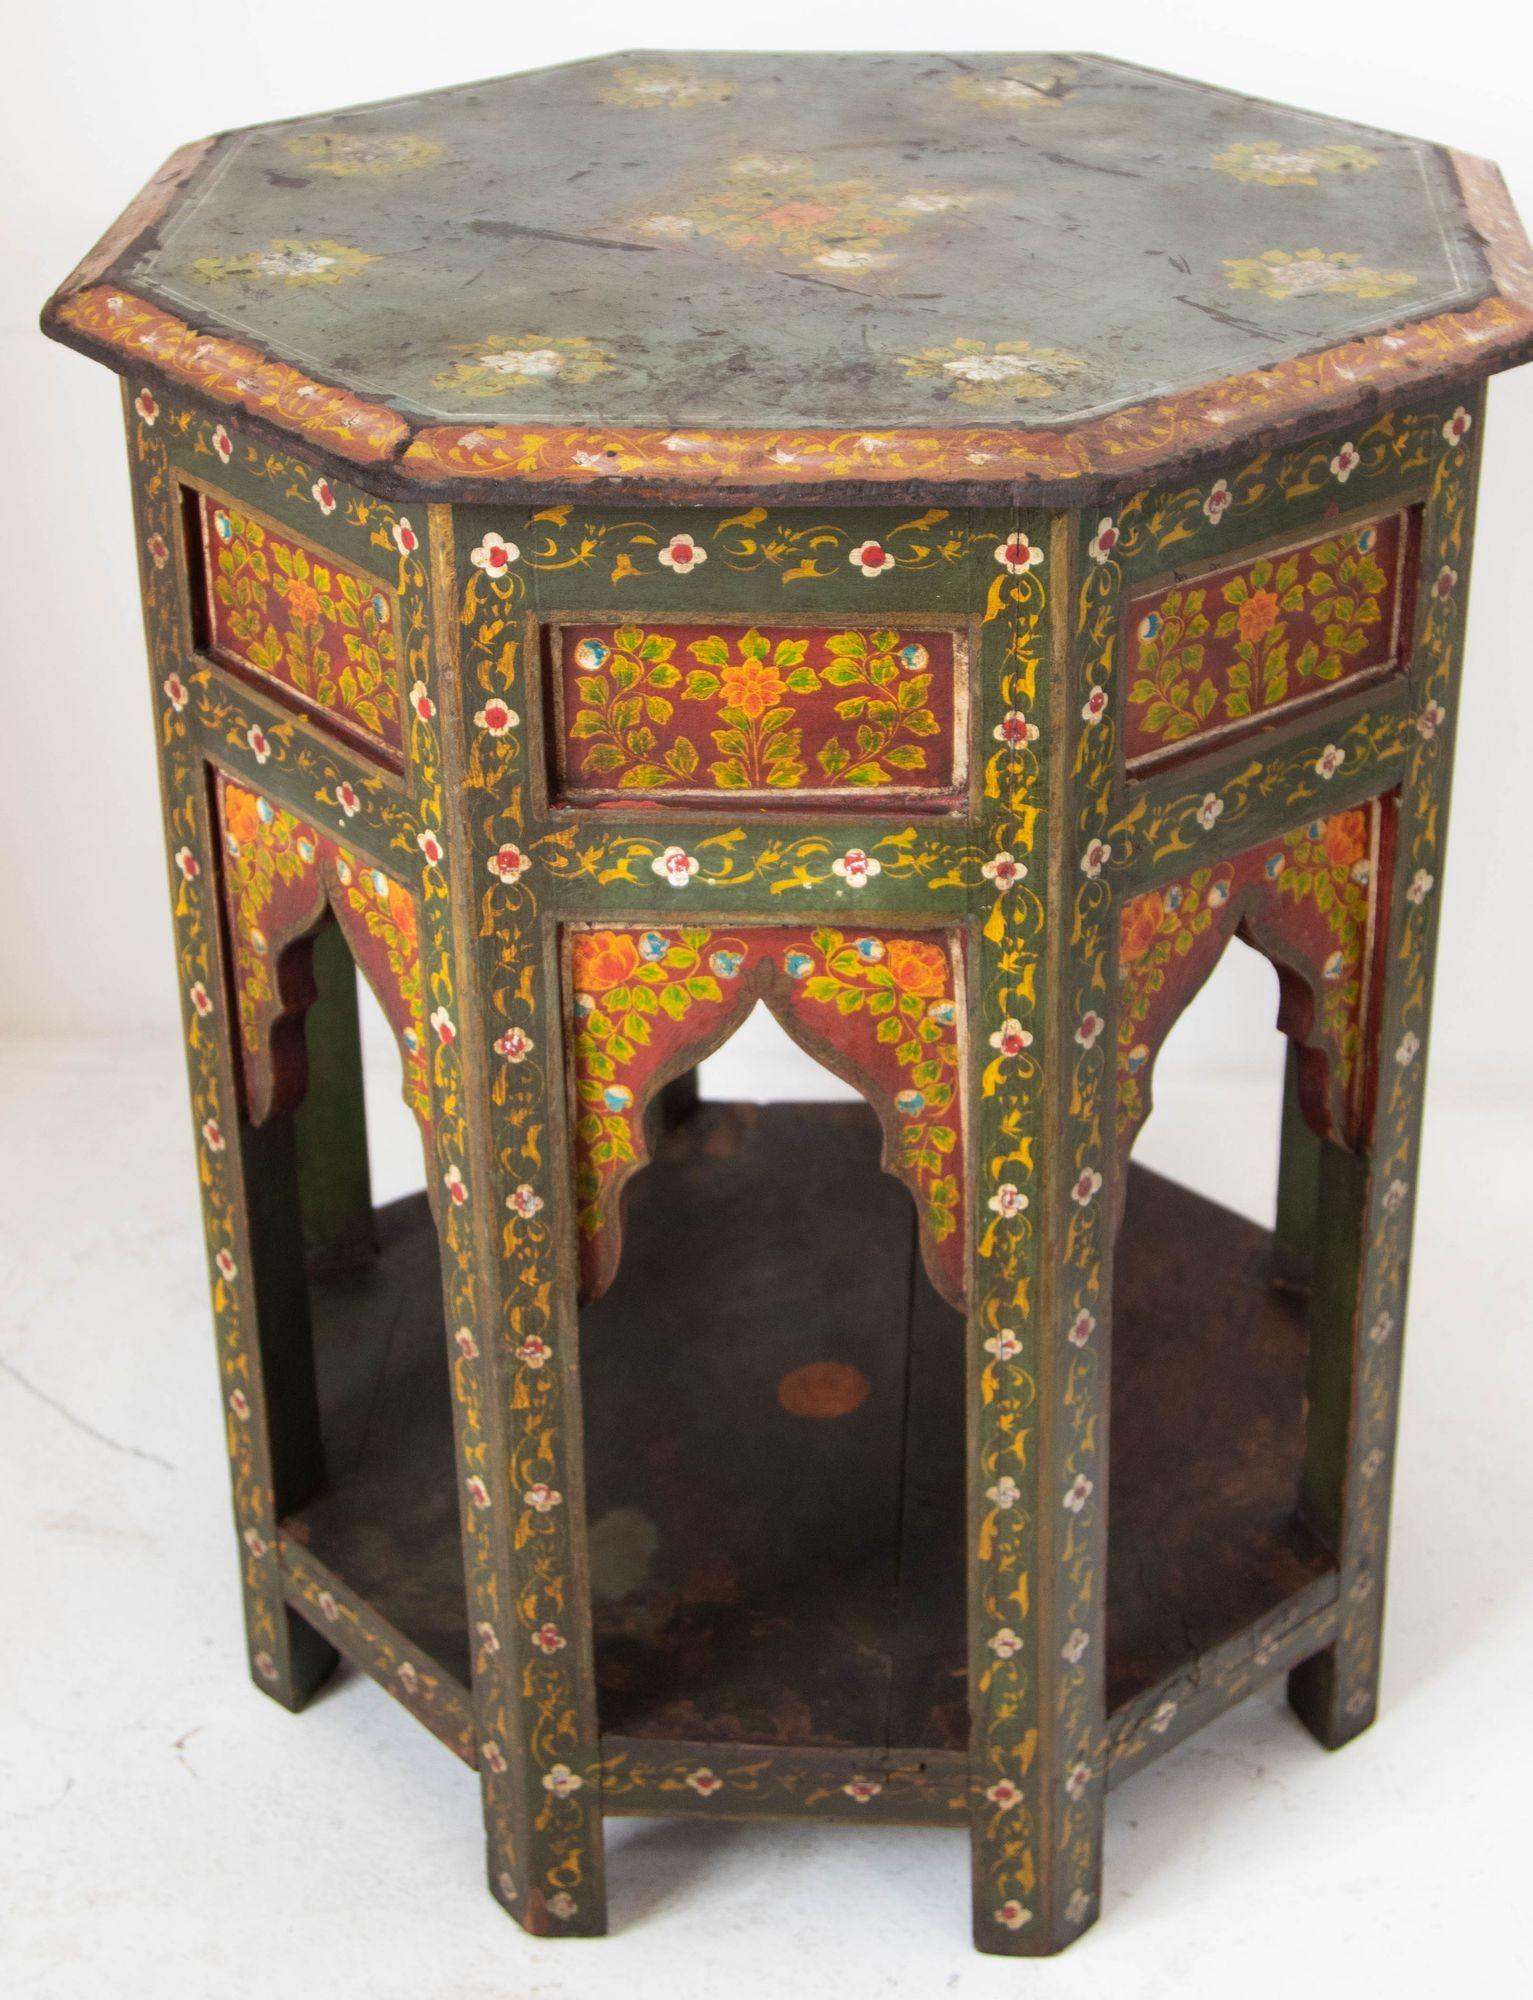 Large vintage Moroccan Moorish Spain Octagonal side table hand painted wood in dark green and red floral design.
Heavy large Moroccan Moorish hand painted teak side table in distressed antique look.
Moroccan vintage octagonal table hand painted on